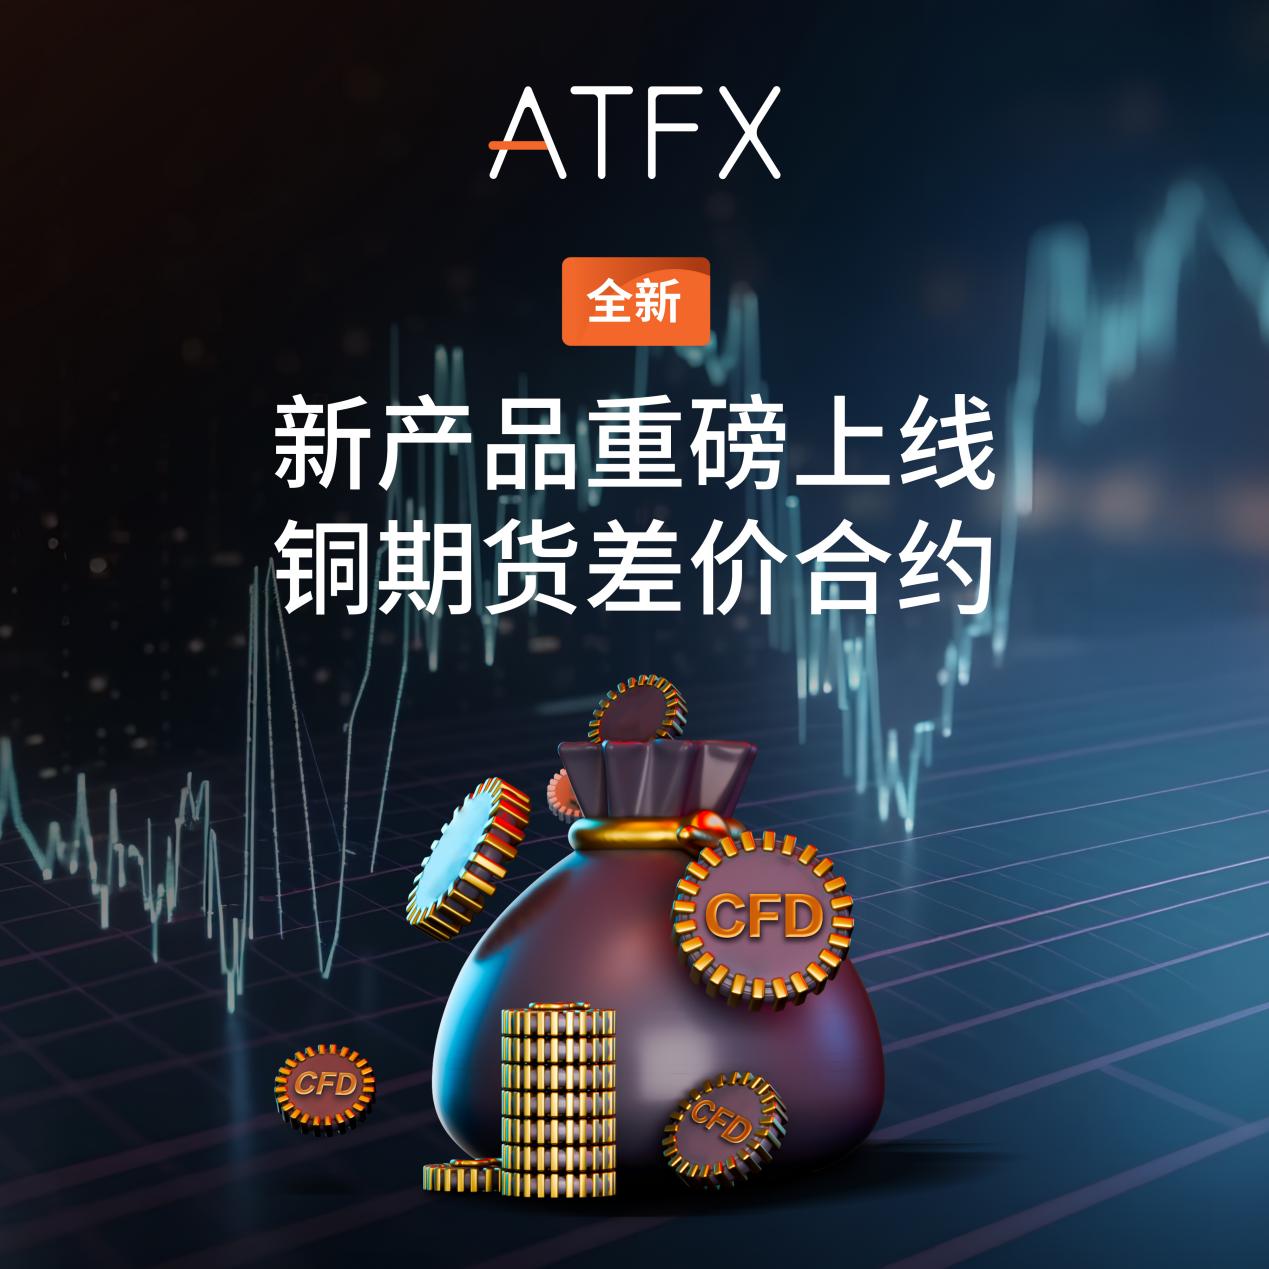 Focusing on diversified investment needs,ATFXThe new copper futures contract for price difference was stunningly launched394 / author:atfx2019 / PostsID:1726268